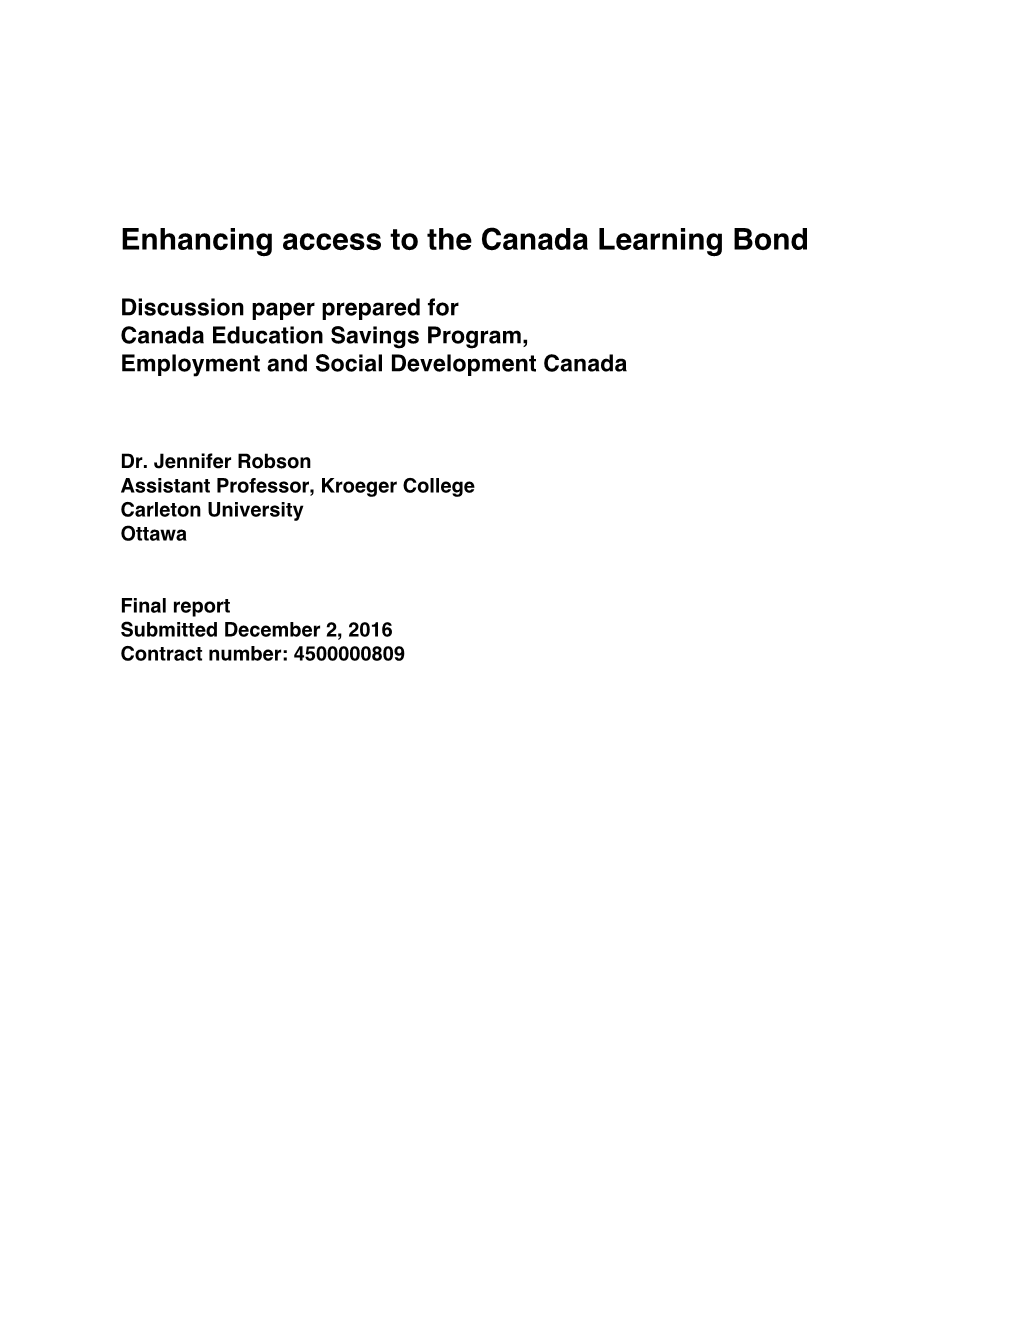 Enhancing Access to the Canada Learning Bond